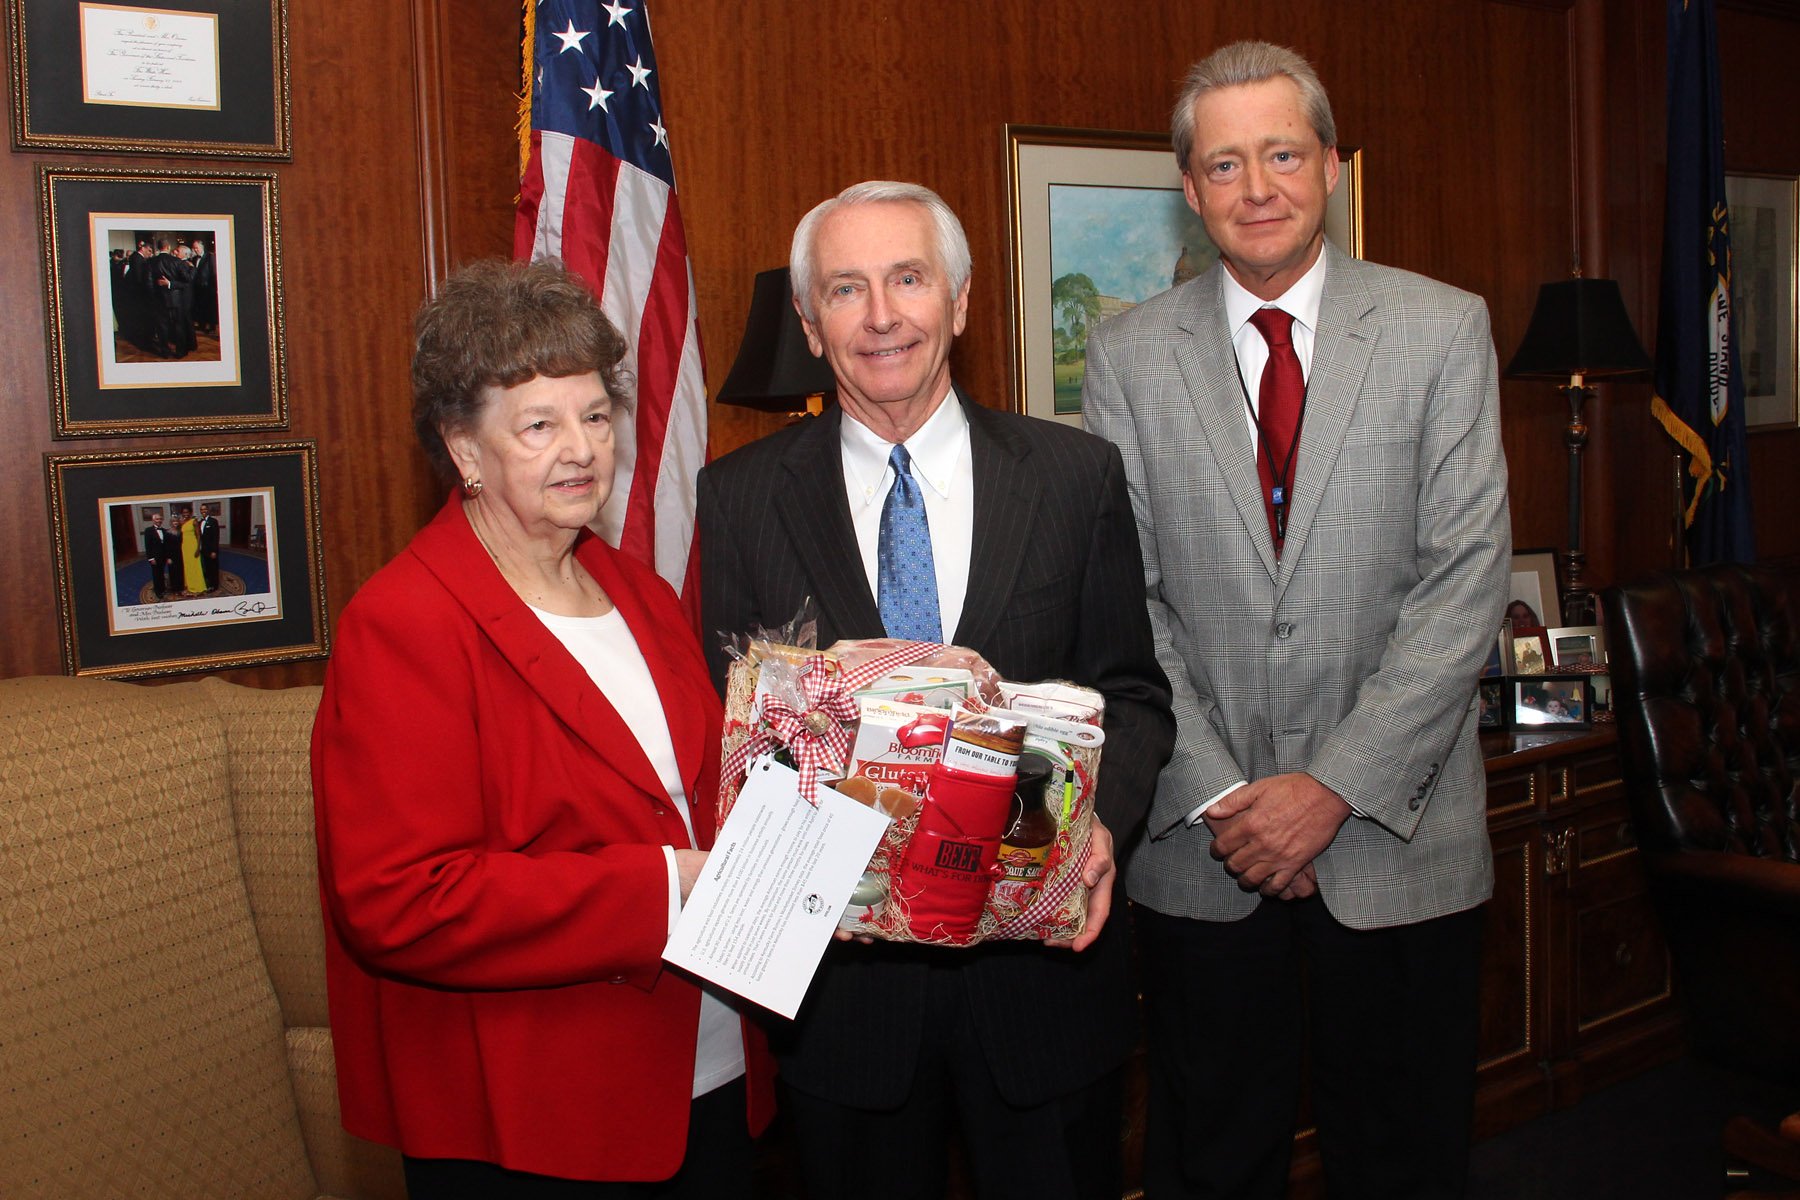 KFB Women’s Committee Chairperson Phyllis Amyx and Public Affairs Director Jeff Harper presented a gift basket to Governor Steve Beshear.